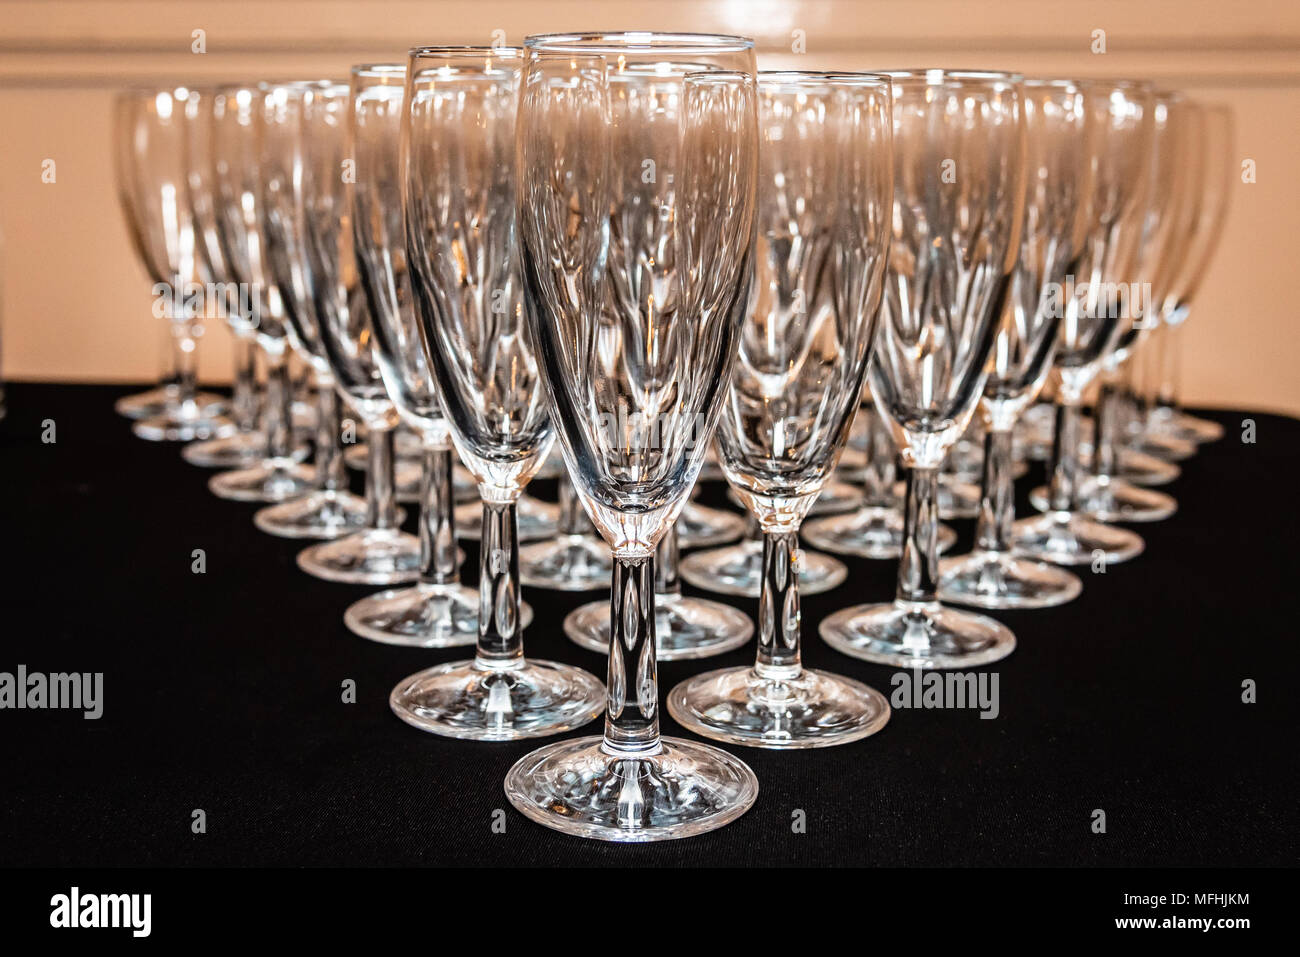 Rows of Champagne glasses Stock Photo